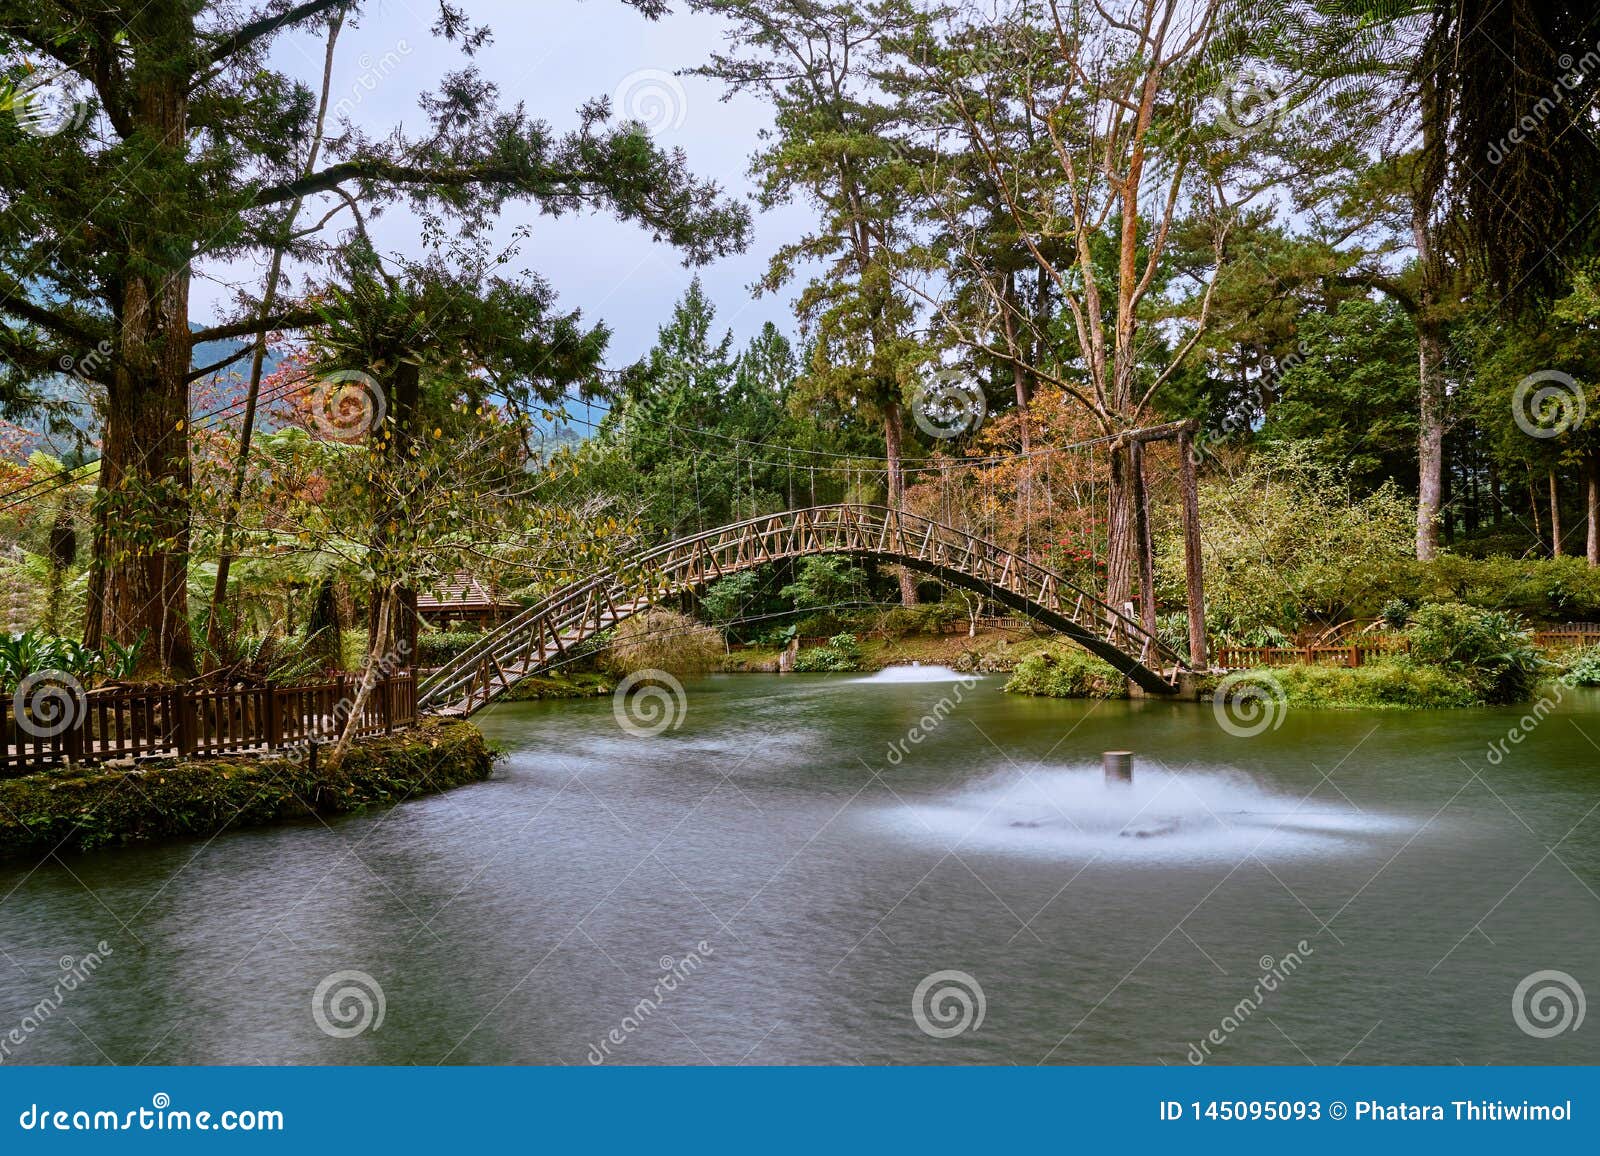 beautiful wooden arch bridge scenics at university pond in xitou nature education area